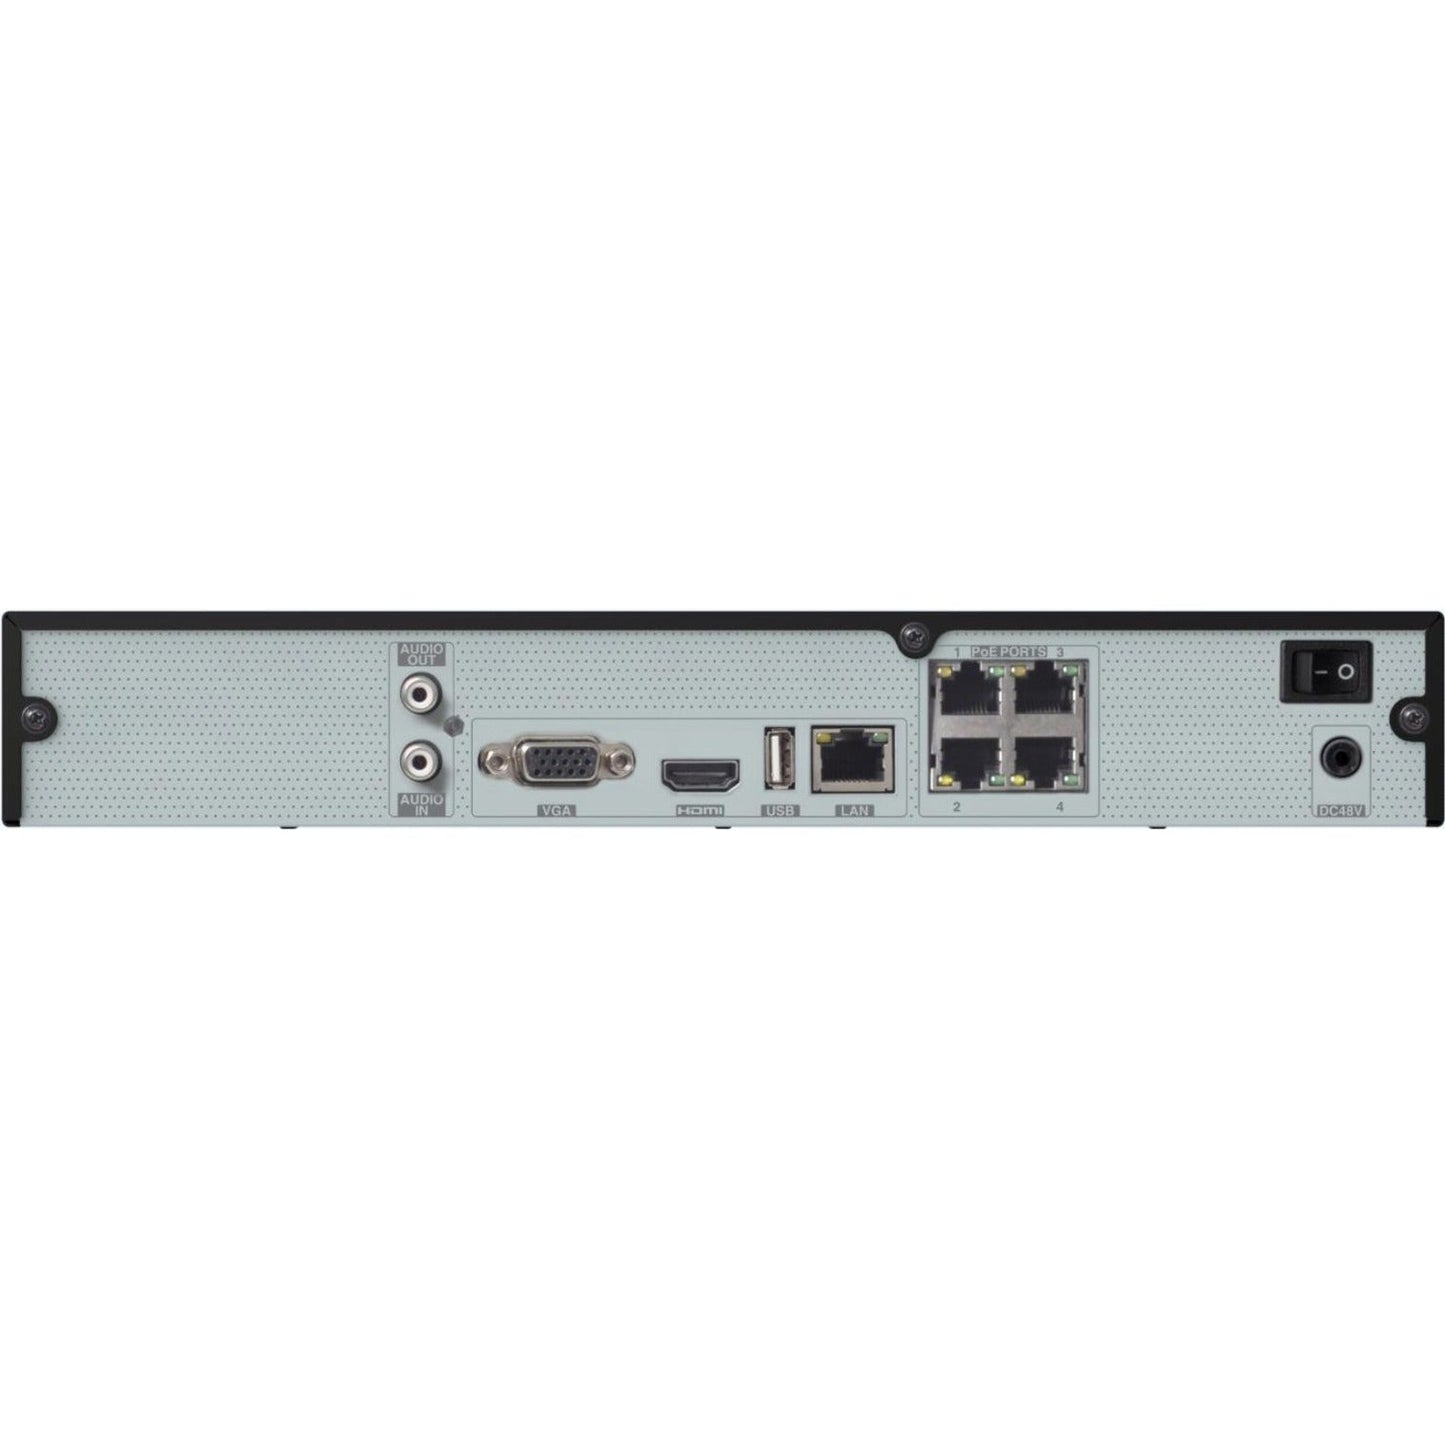 Speco 4 Channel NVR with 4 Built-In PoE Ports - 1 TB HDD